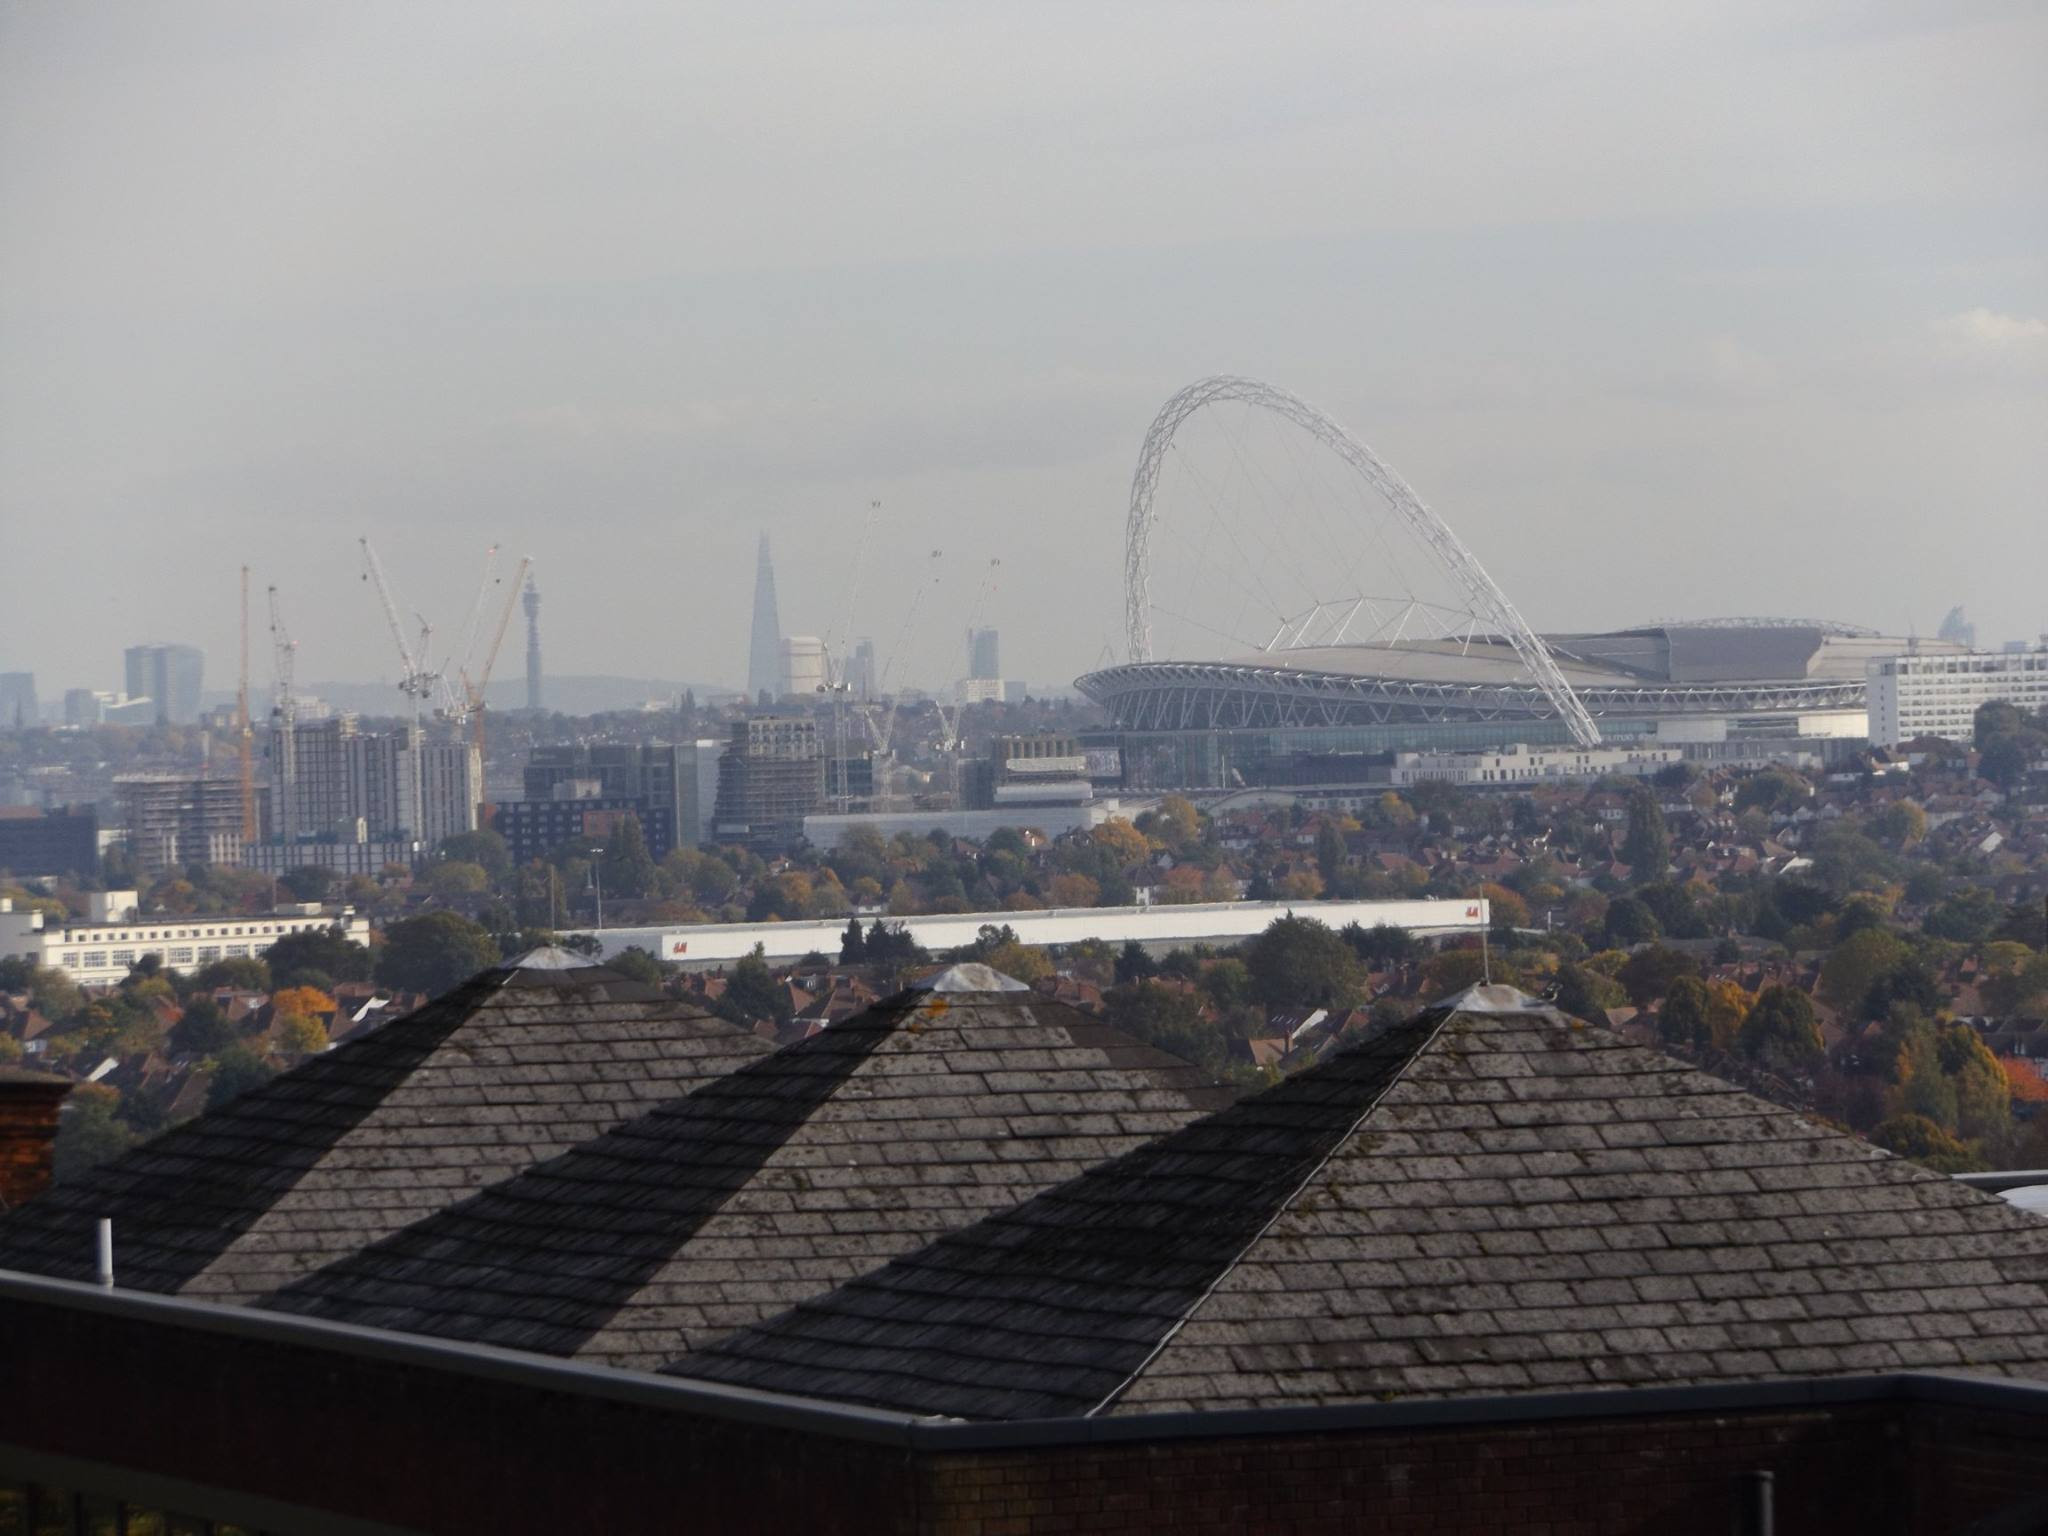 Wembley Stadium, current venue for the FA Cup Final, as seen from Harrow School ©Philip Barker 